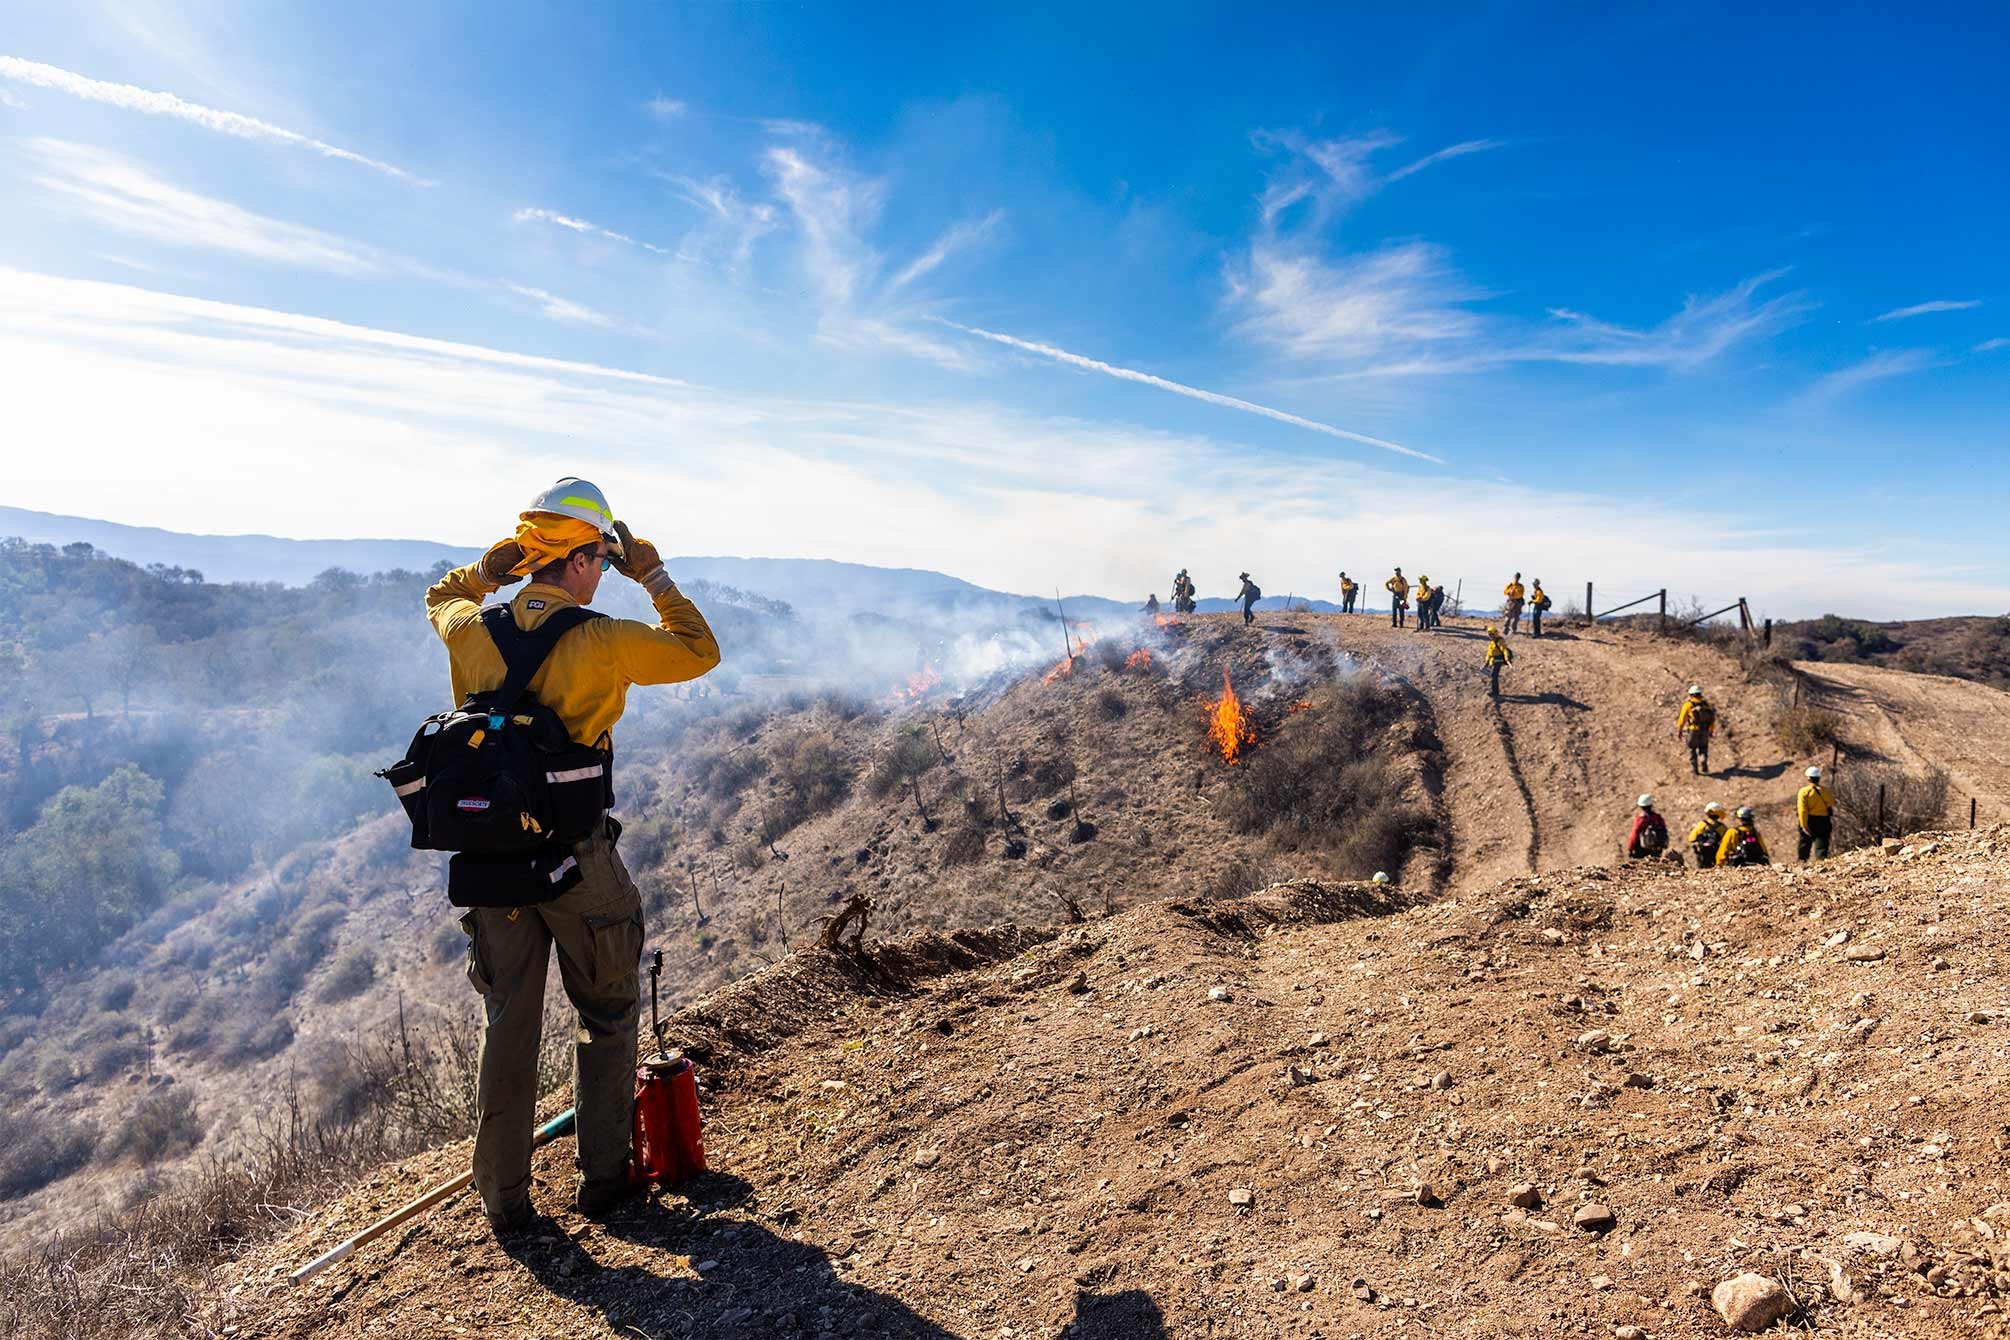 A man adjusts his hardhat on the crest of a hill as he watches the rest of the crew start the burn farther along the ridgeline.